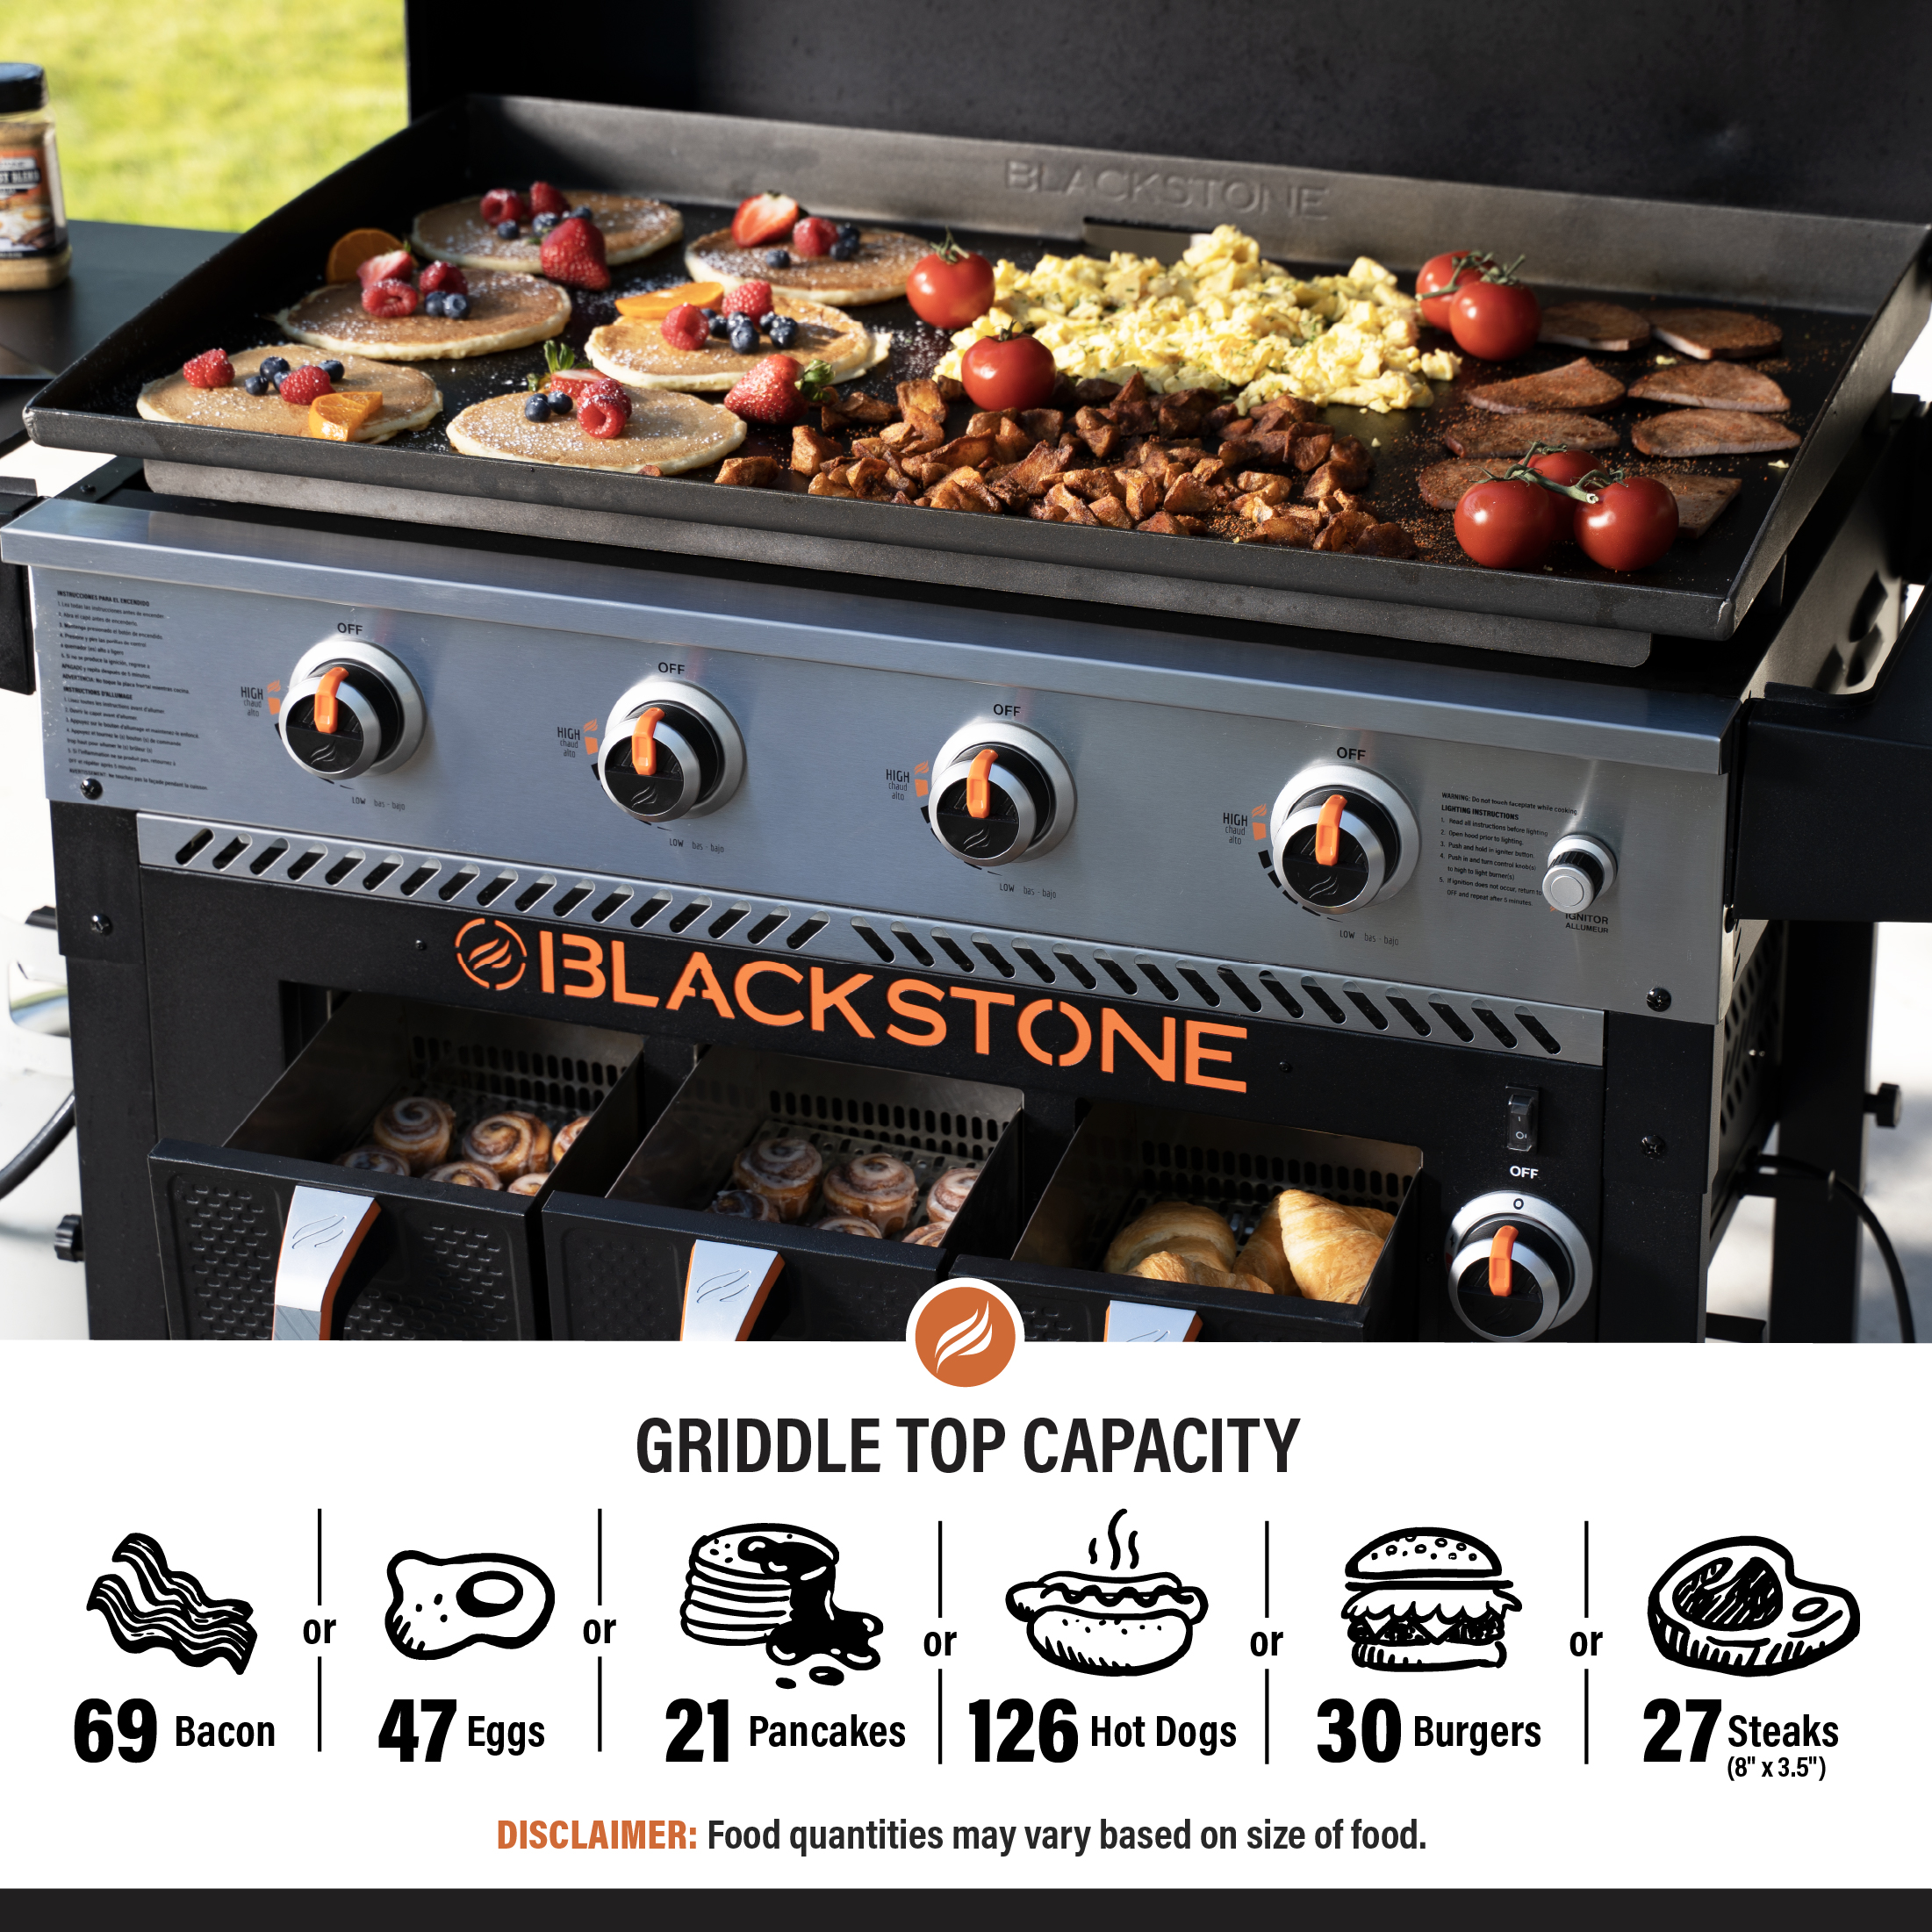 Blackstone 4-Burner 36" Propane Griddle with Air Fryer and Hood - image 8 of 23